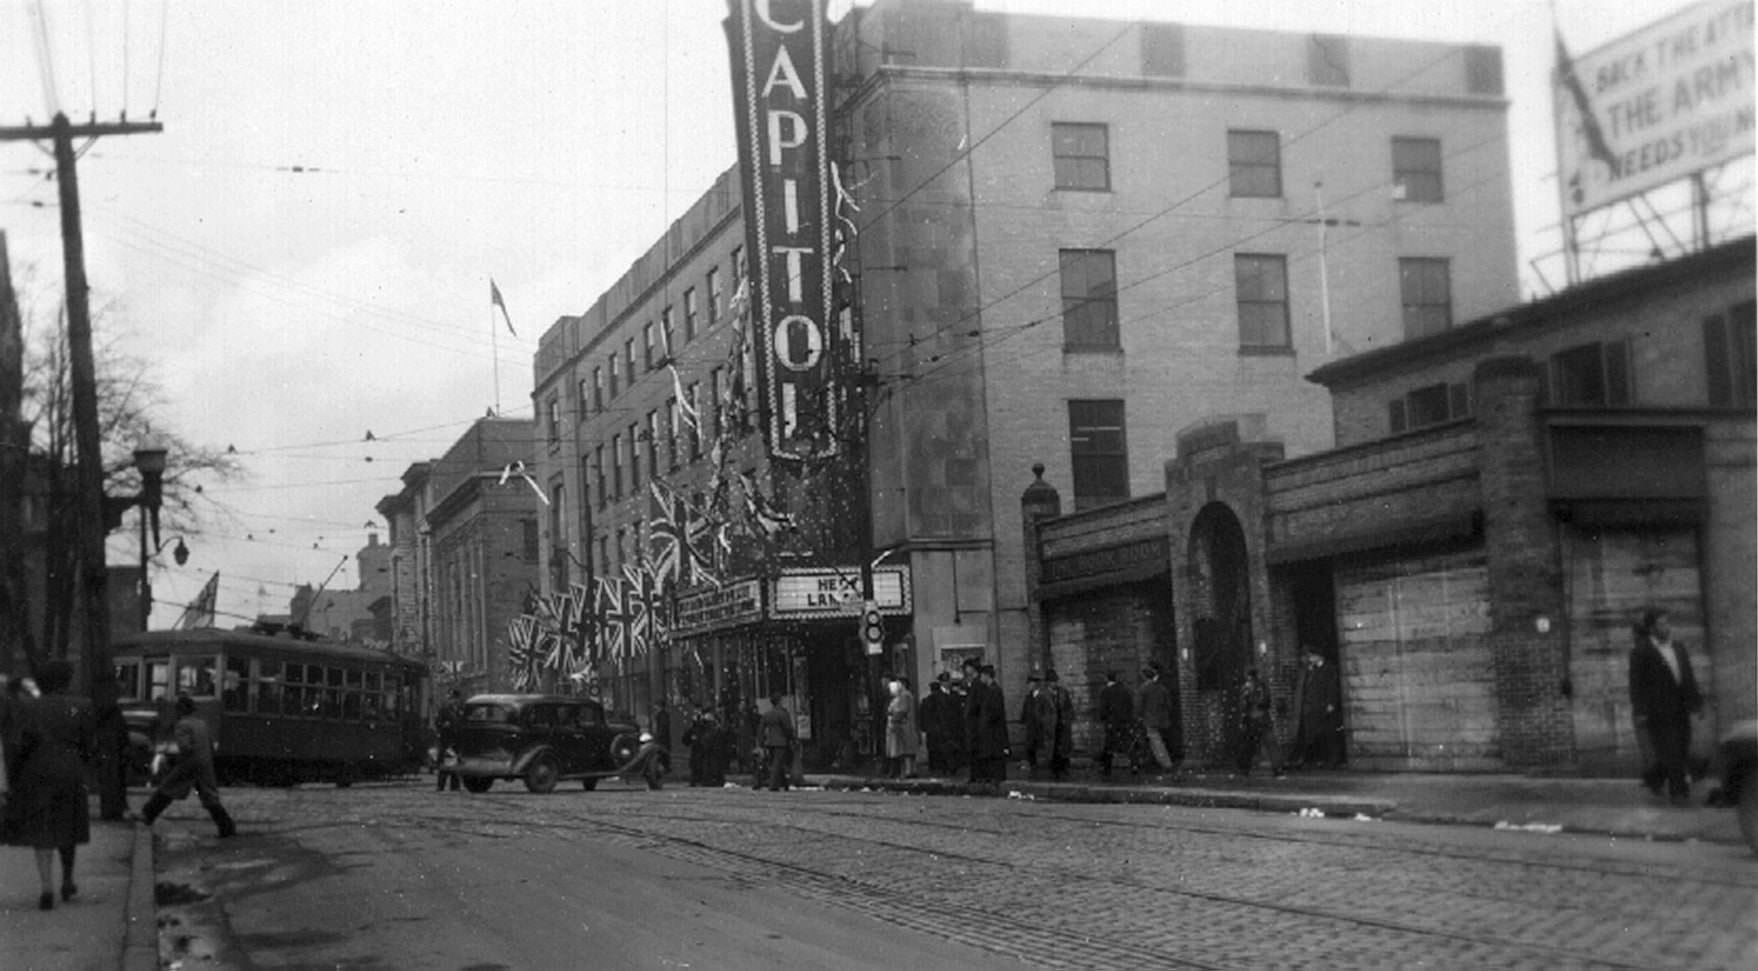 Toronto Street scene, 1940s. The building on the near side of the theatre has "The Book Room" cast right into the facade.